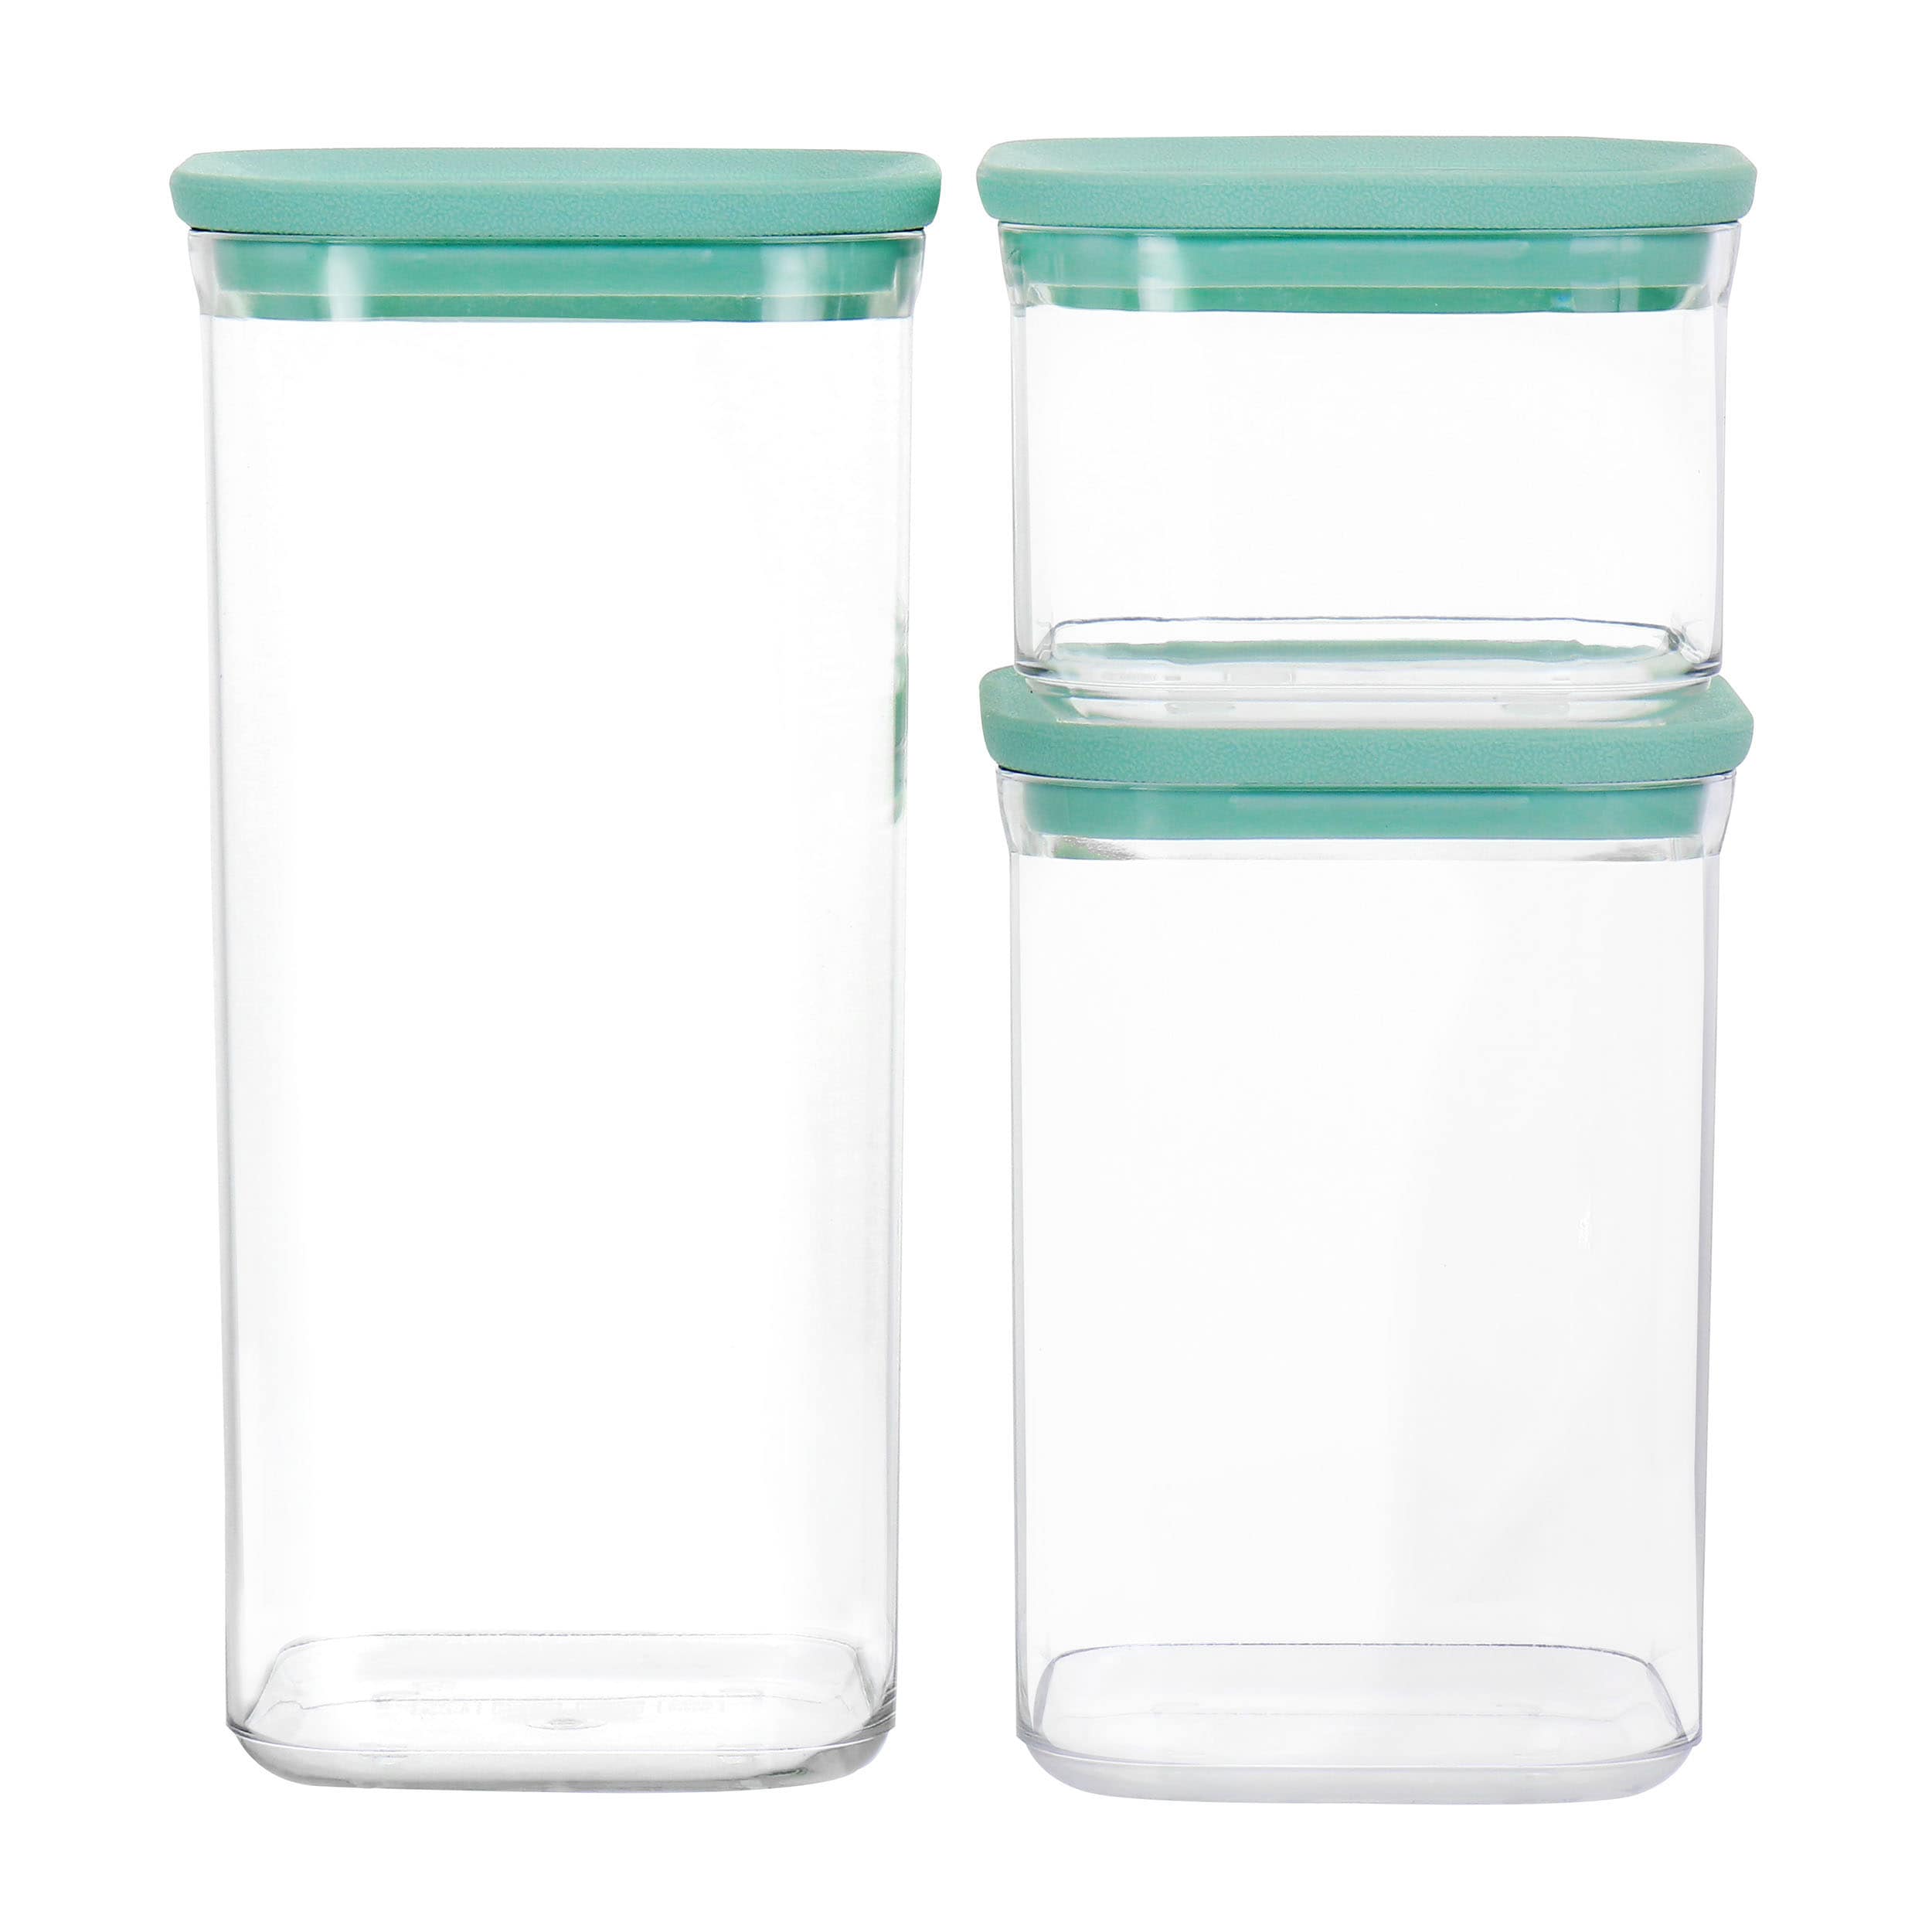 MARTHA STEWART 22 oz. Glass Container with Lid 985116383M - The